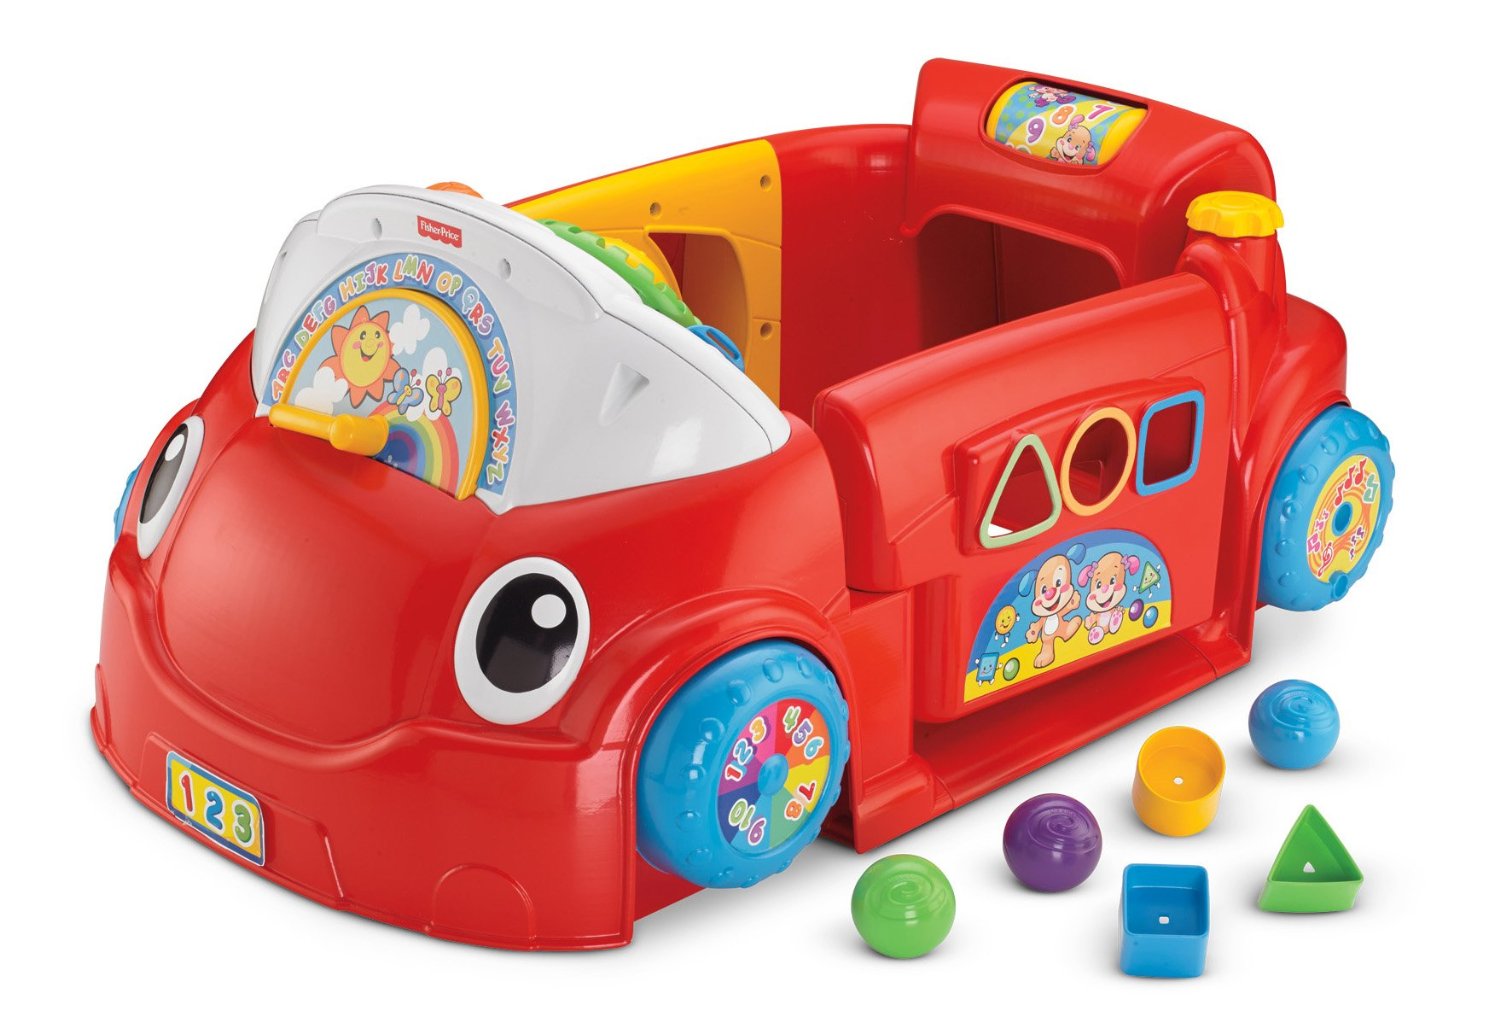 Fisher Price Laugh & Learn Smart Stages Crawl Around Car